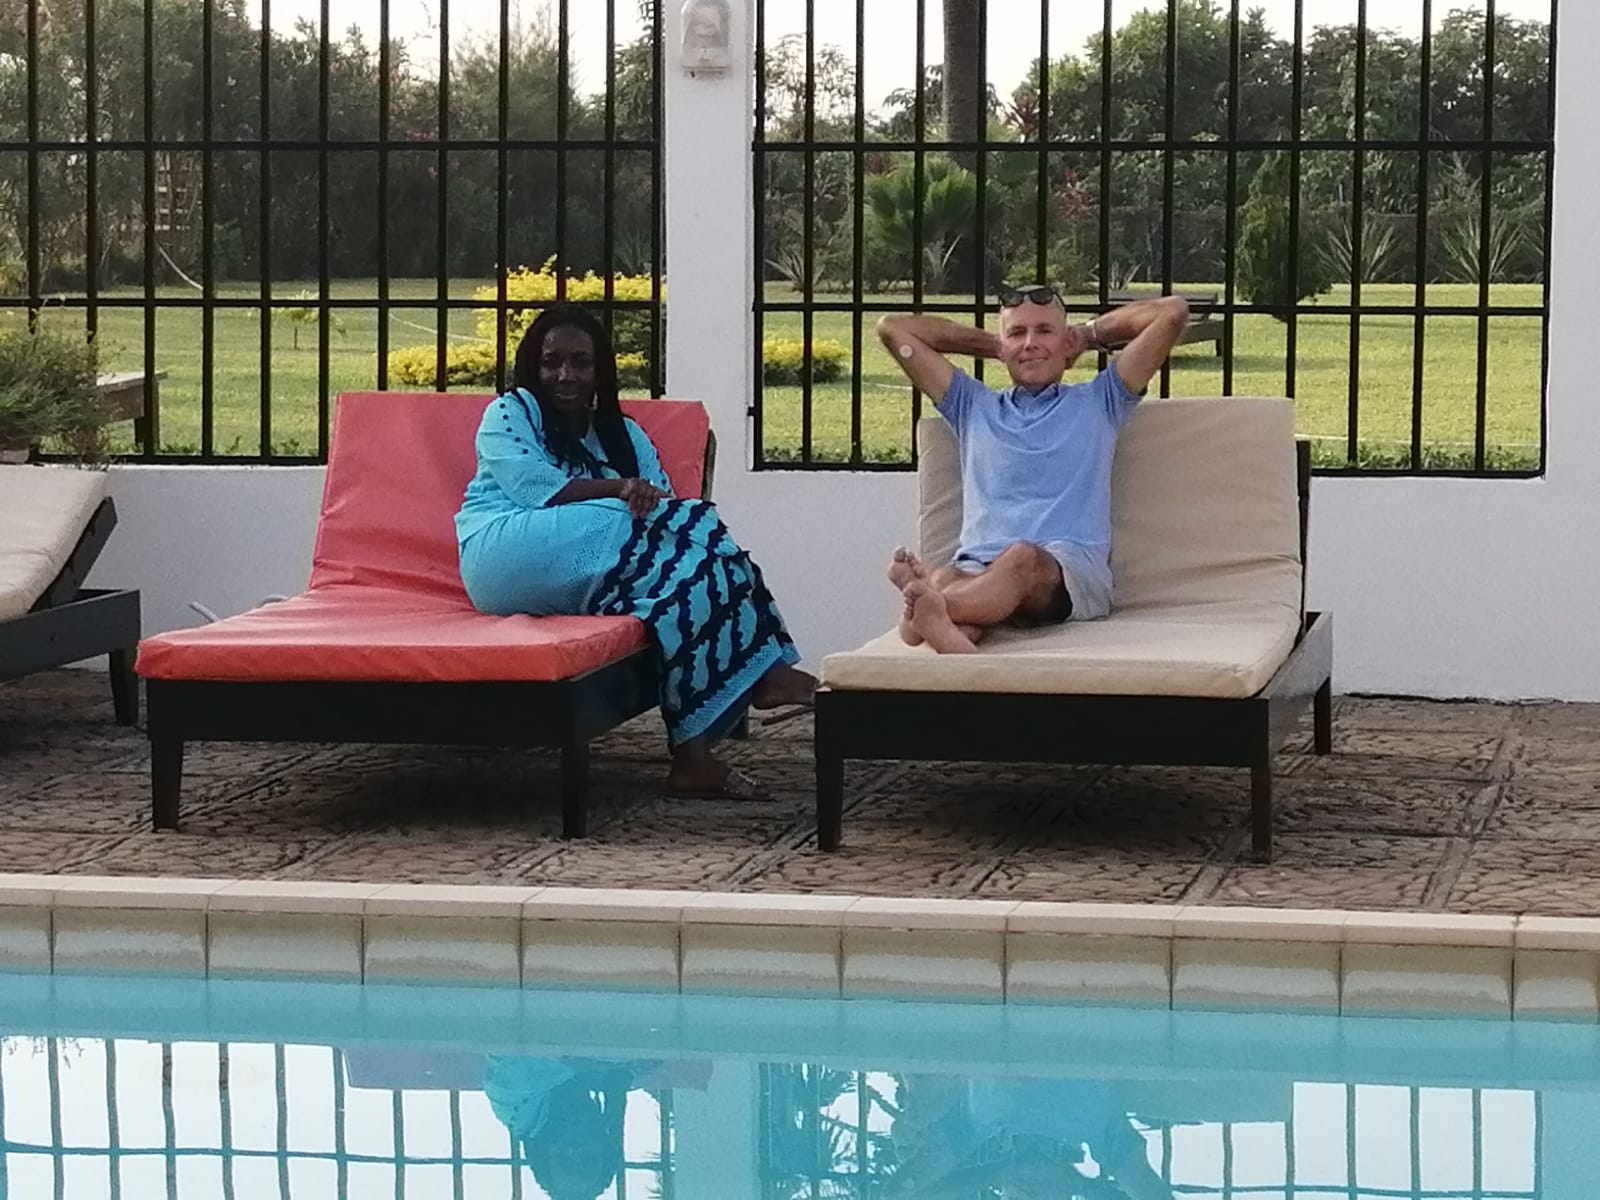 HarmonyInterview - CHRISTMAS &amp; NEW YEAR's DAY IN GAMBIA! HARMONY RESORT OFFERS A GREAT GARDEN &amp; POOL AND AN ABSOLUTE PRIME LOCATION WITH SEA VIEW